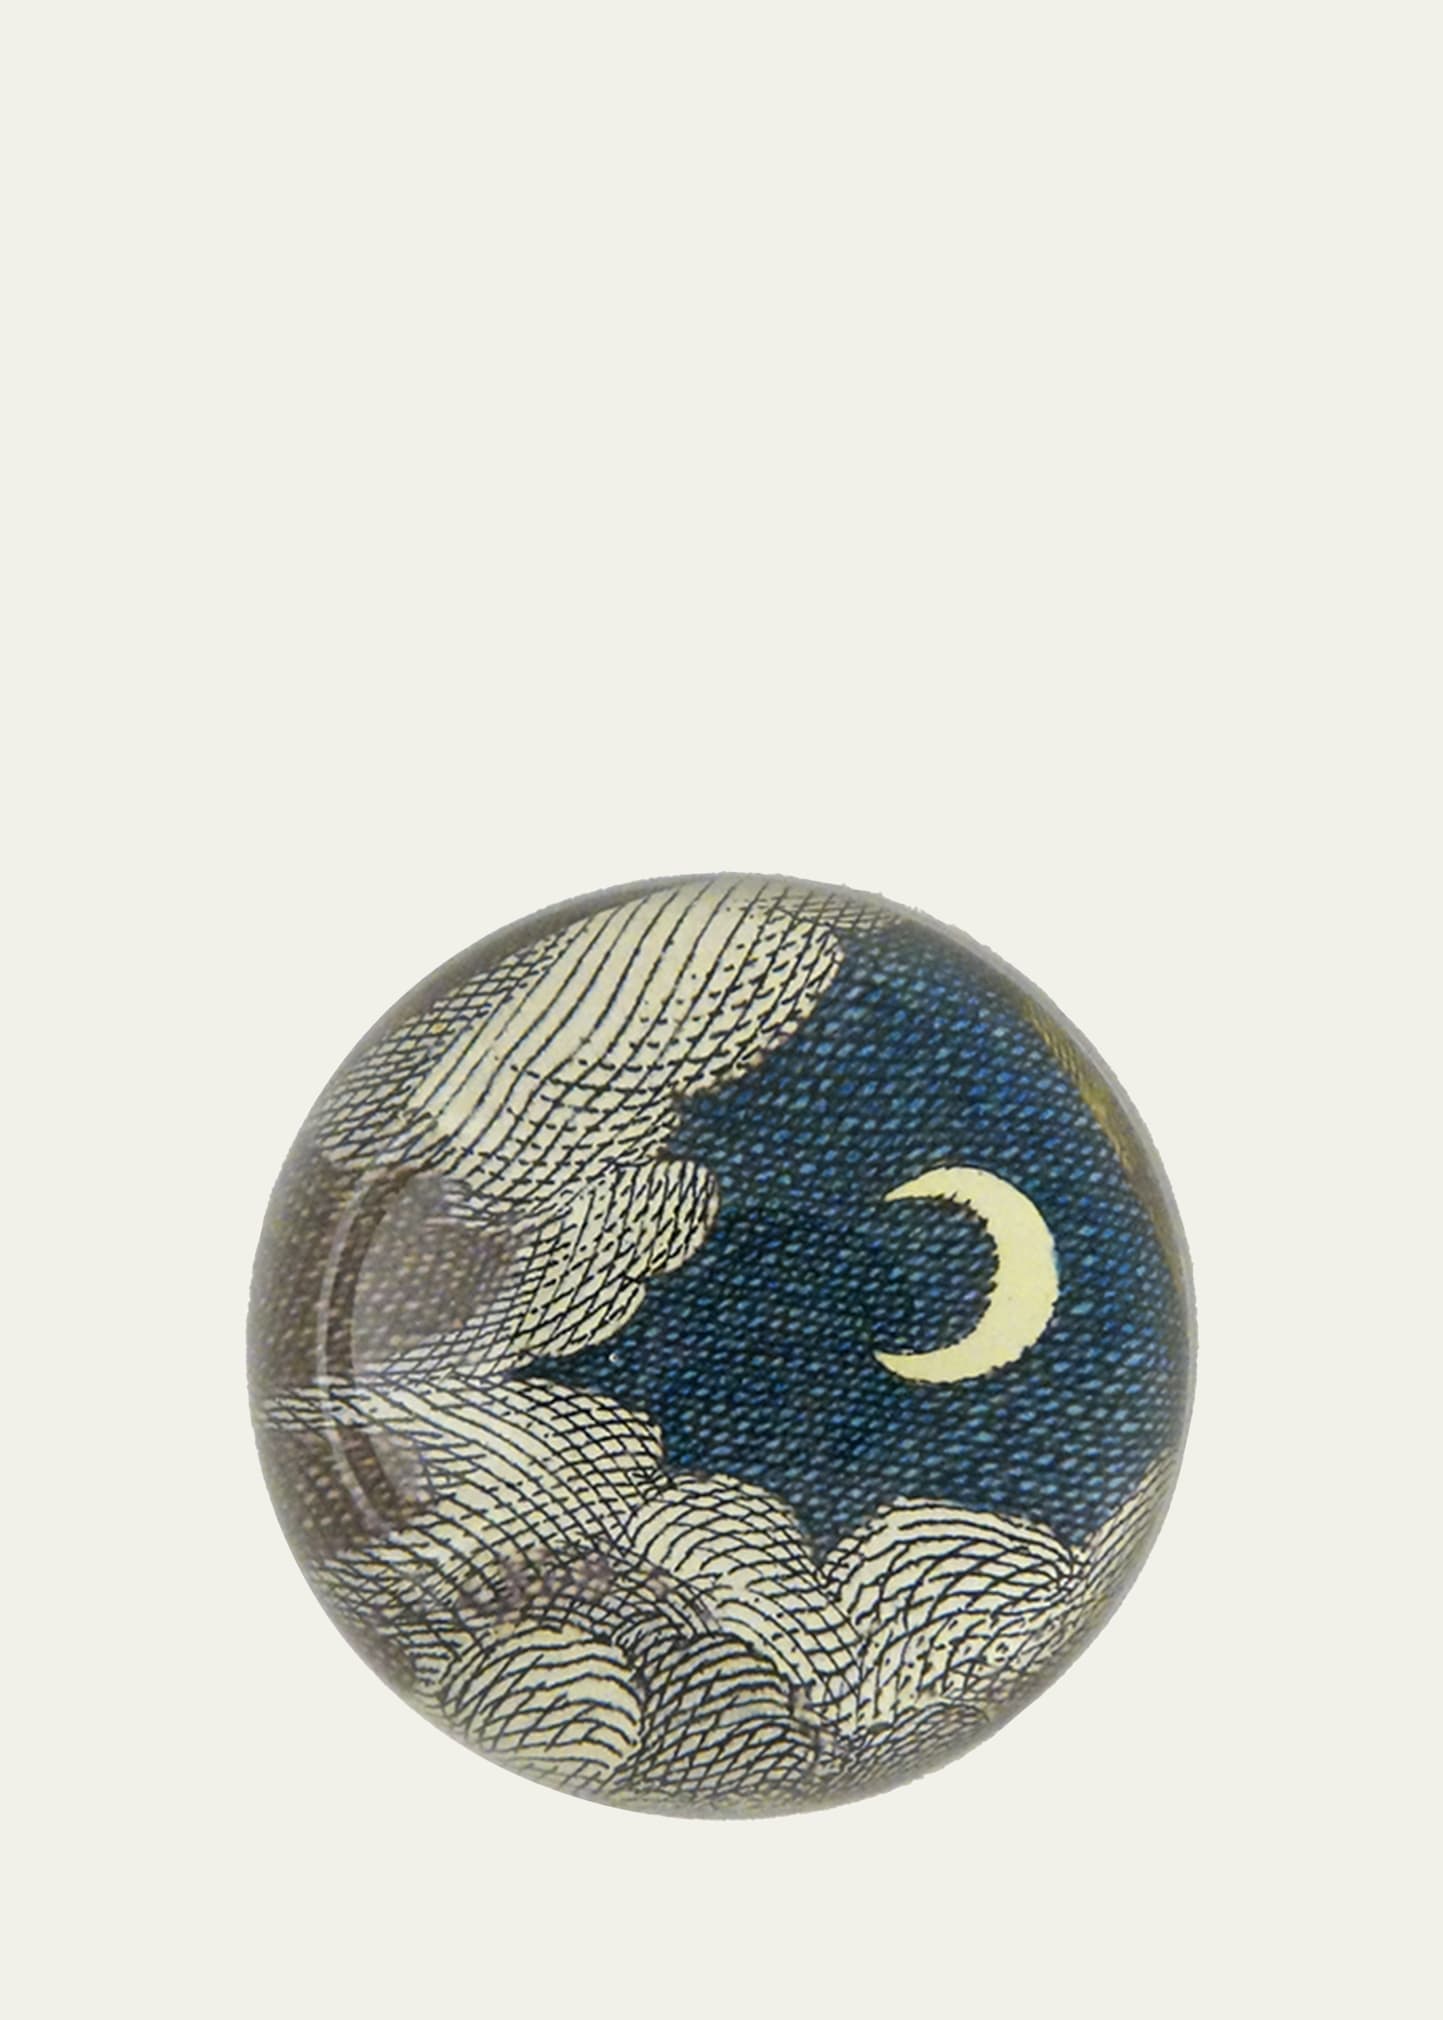 Peacock Dome Paperweight